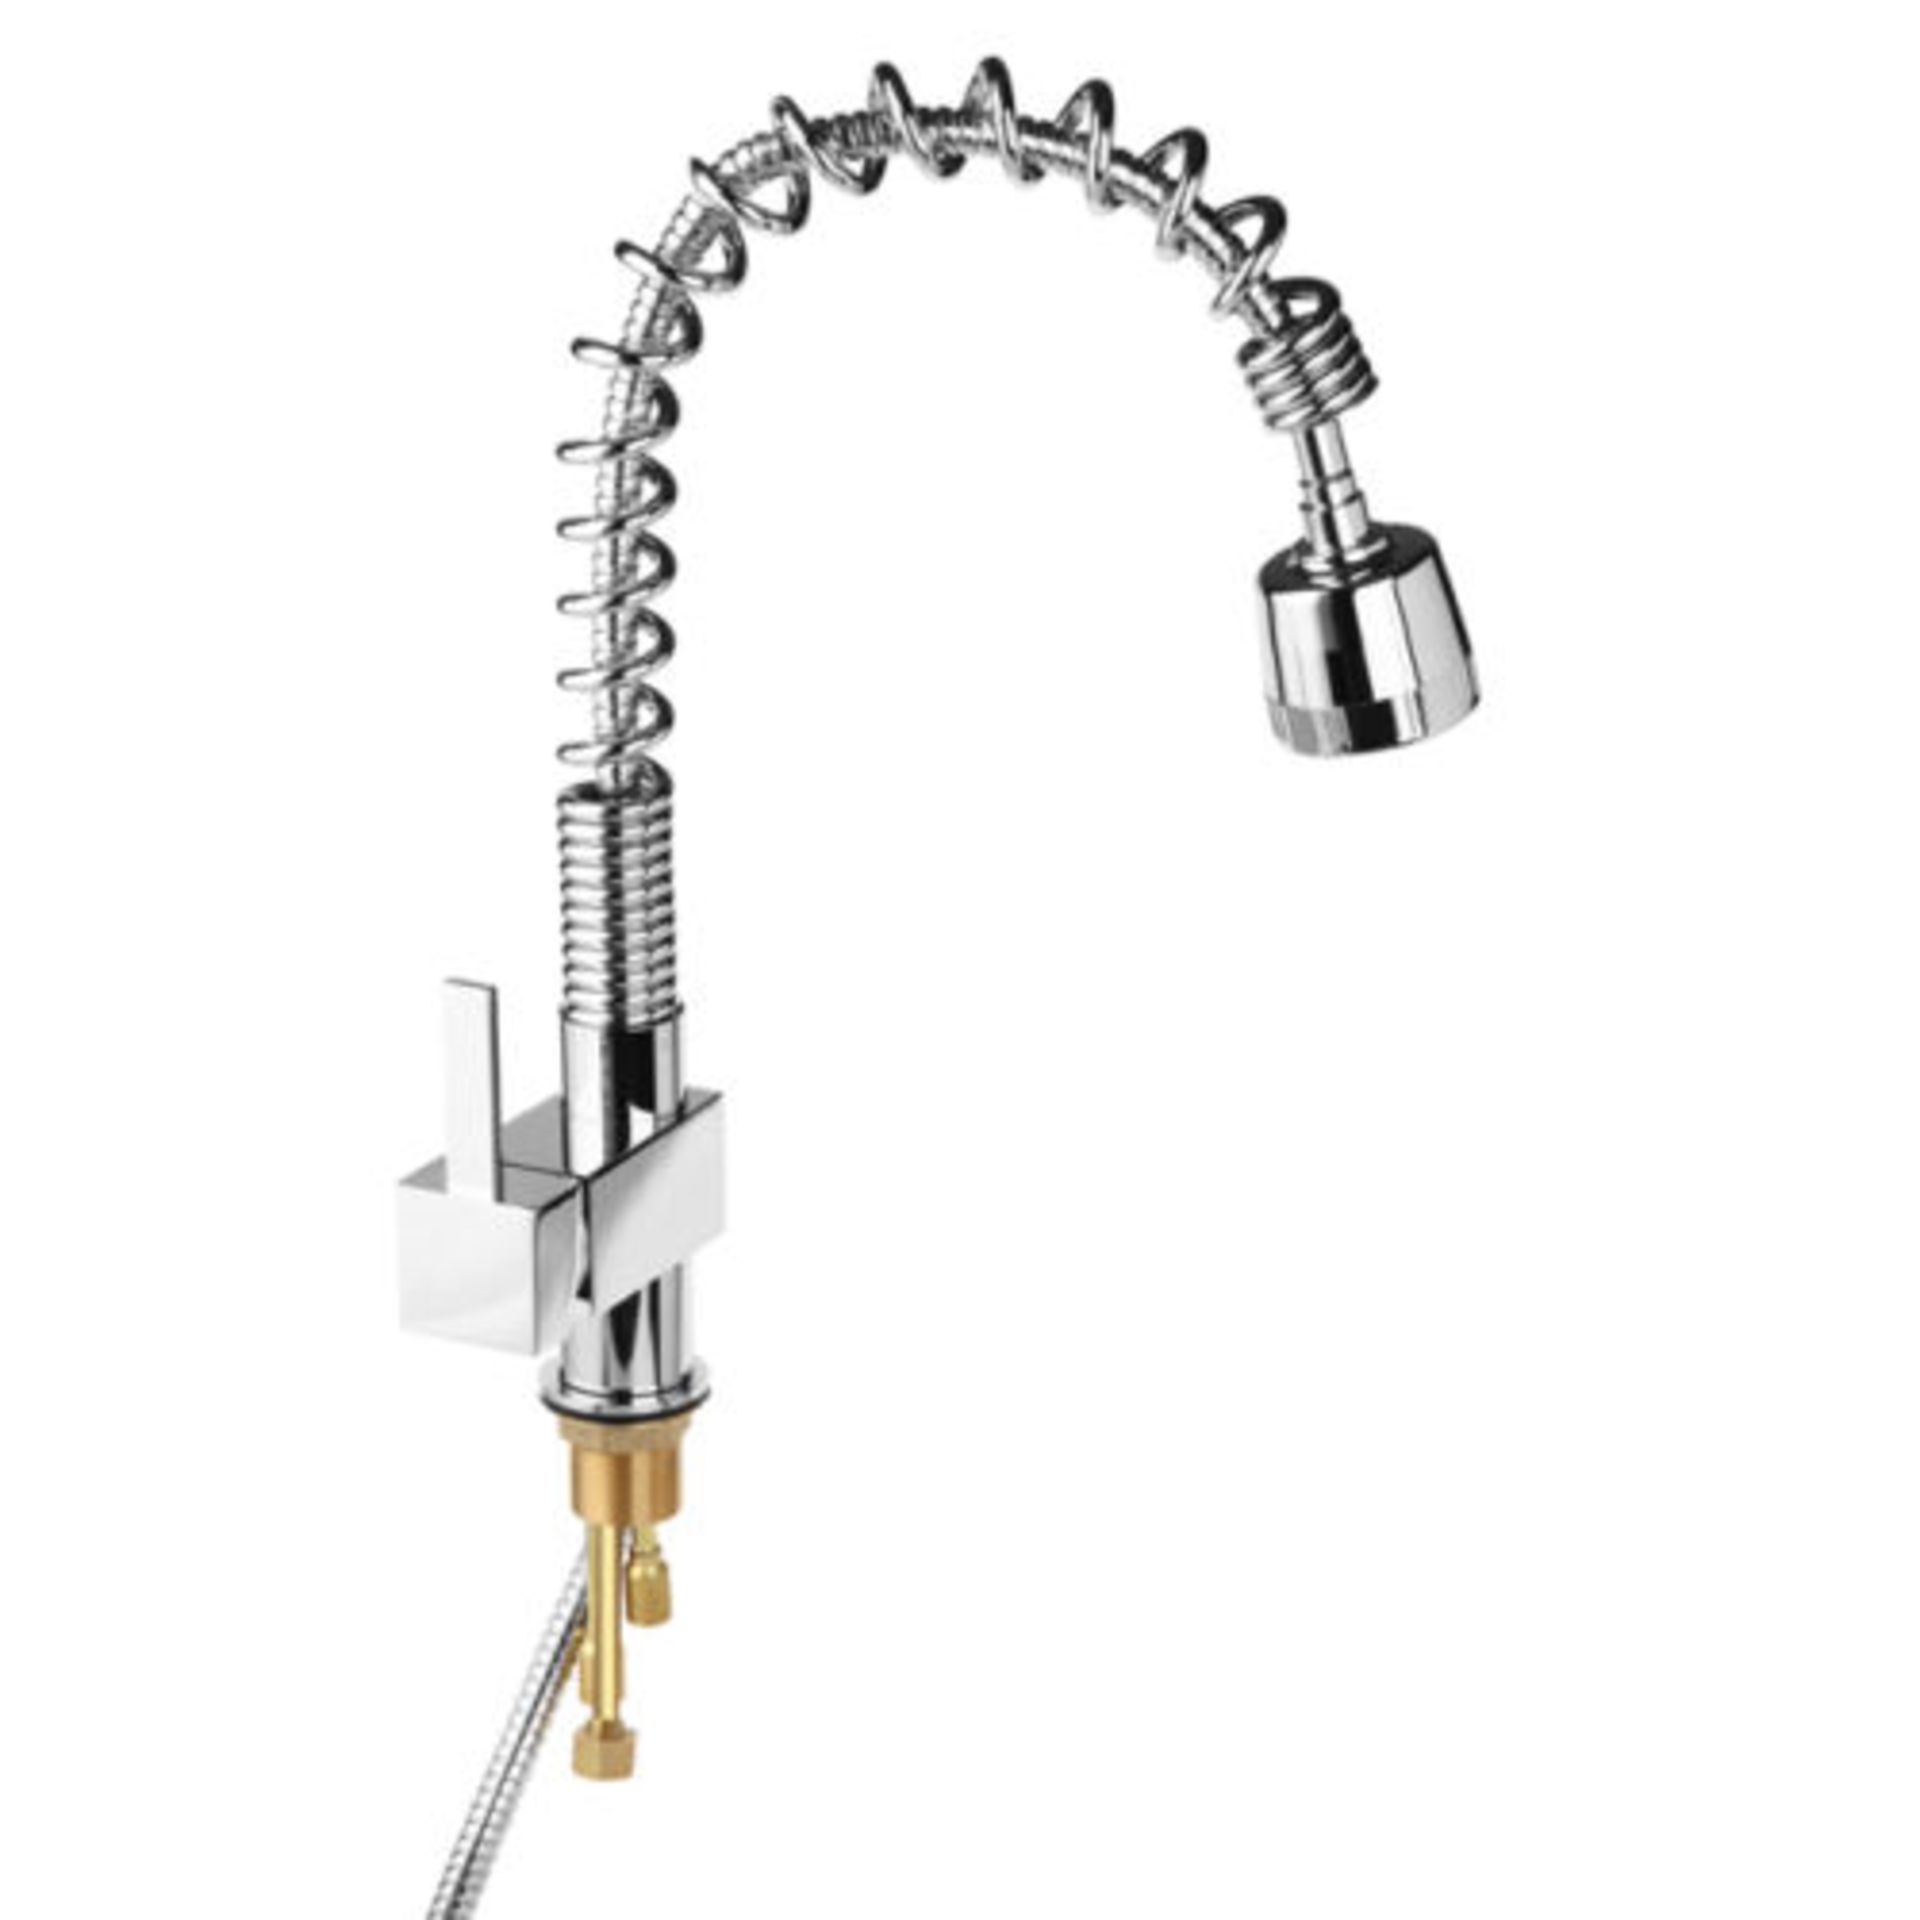 (AH225) Maddie Brushed Chrome Monobloc Kitchen Tap Swivel Pull Out Spray Mixer. RRP £219.99. - Image 2 of 2